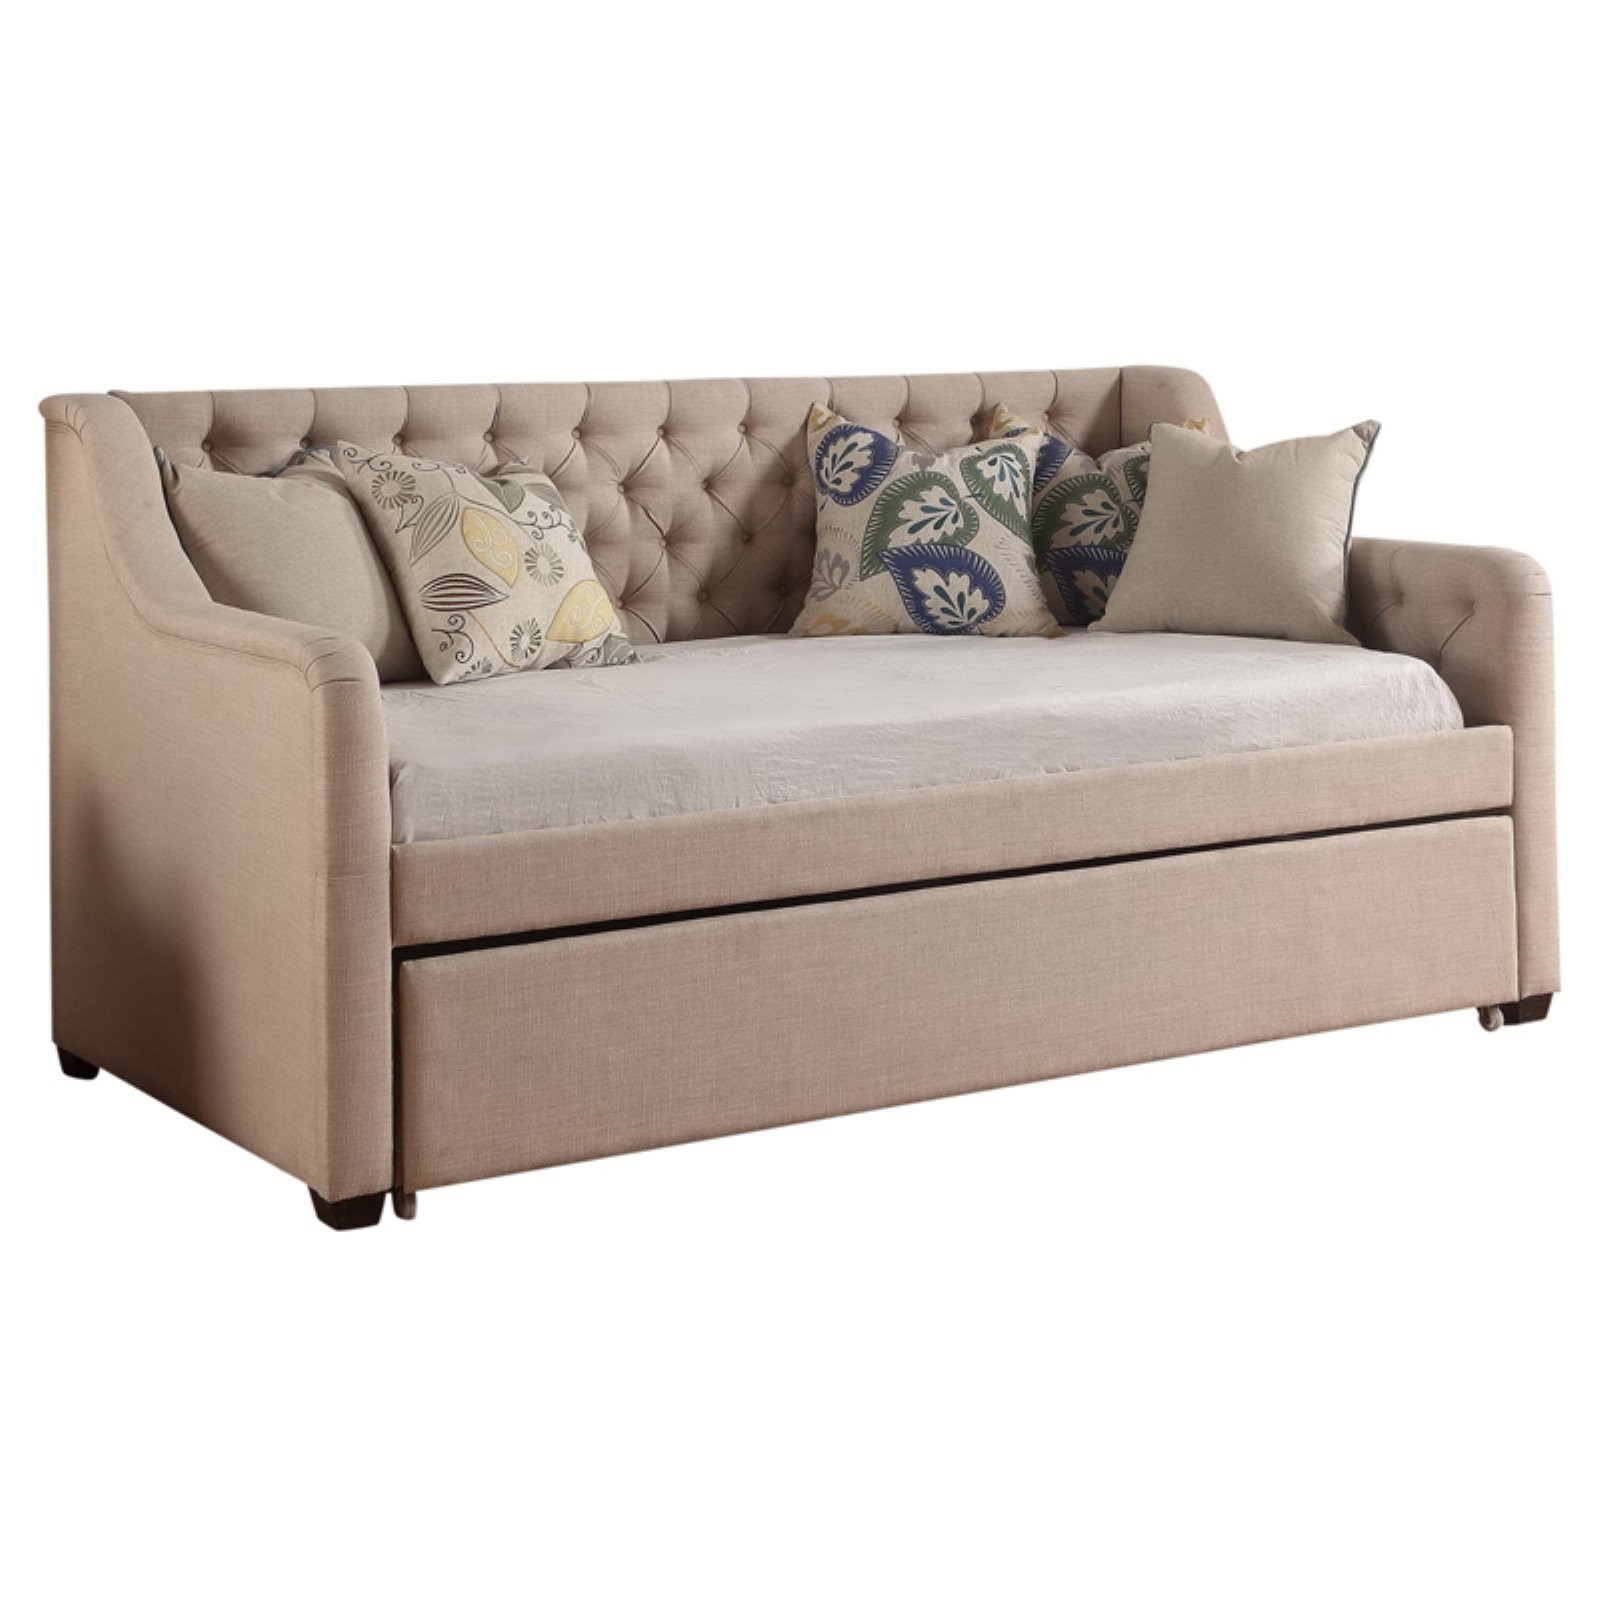 Rosevera wicker park daybed with trundle